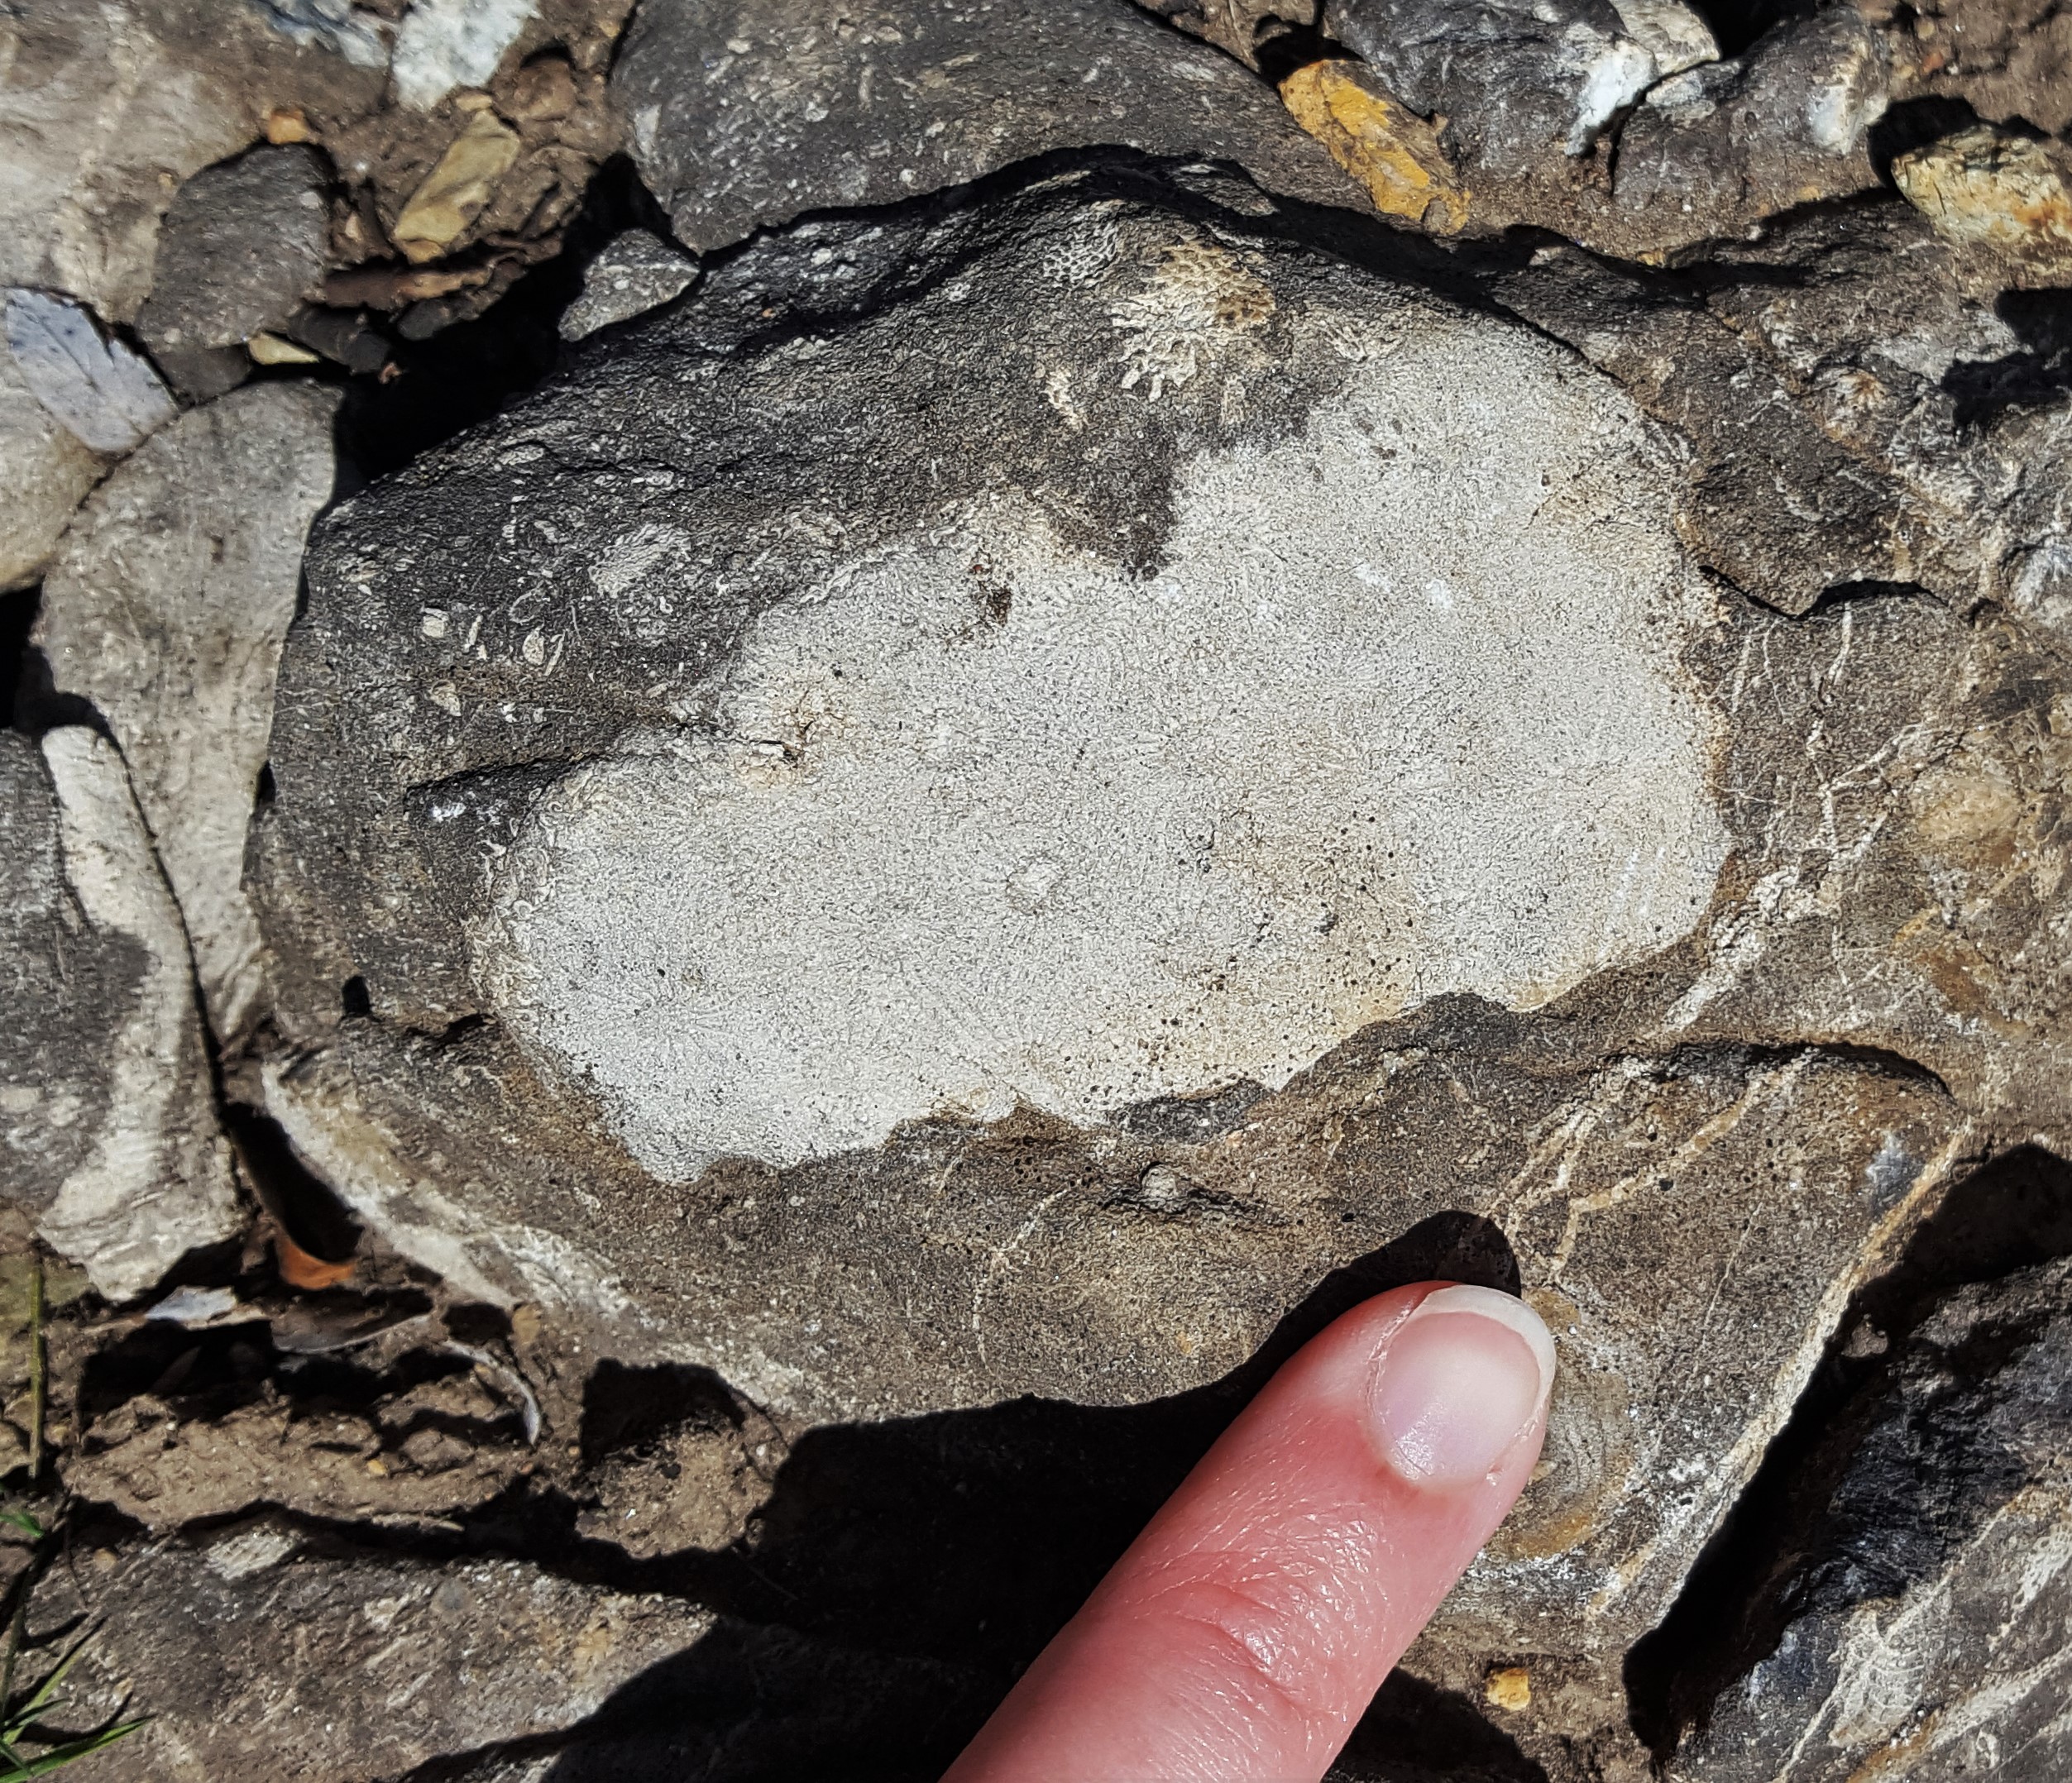 shot of a rocky outcrop with a small massive rugose coral colony with a person's finger for scale (about 4 cm across).